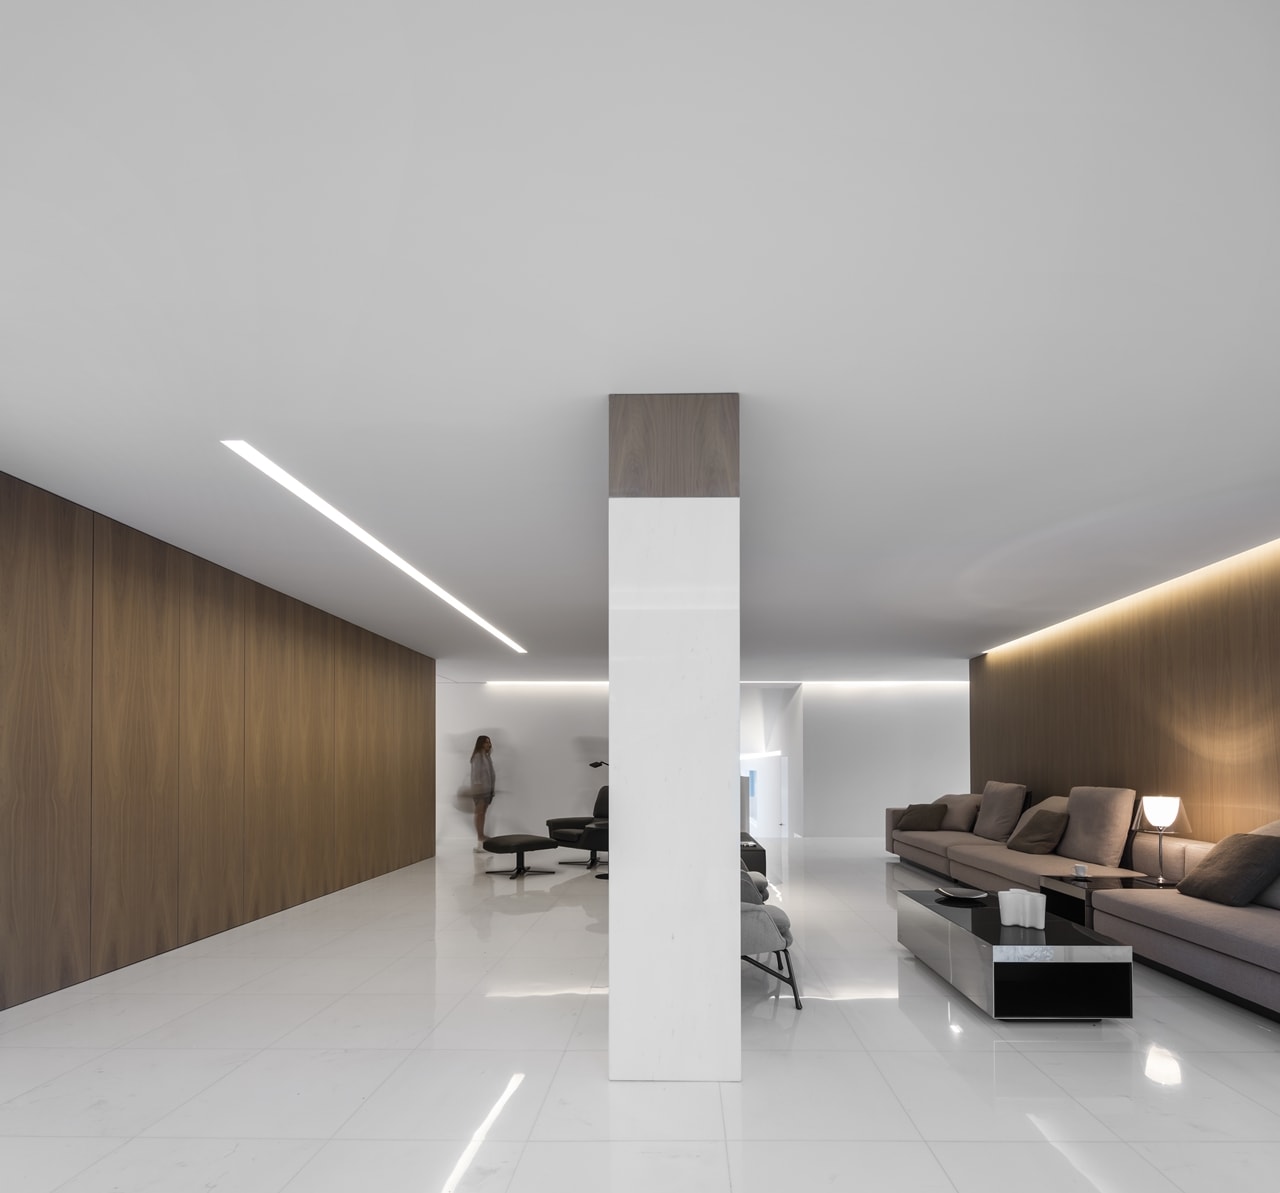 Modern brown and white living room in minimalist house designed by Fran Silvestre Architects